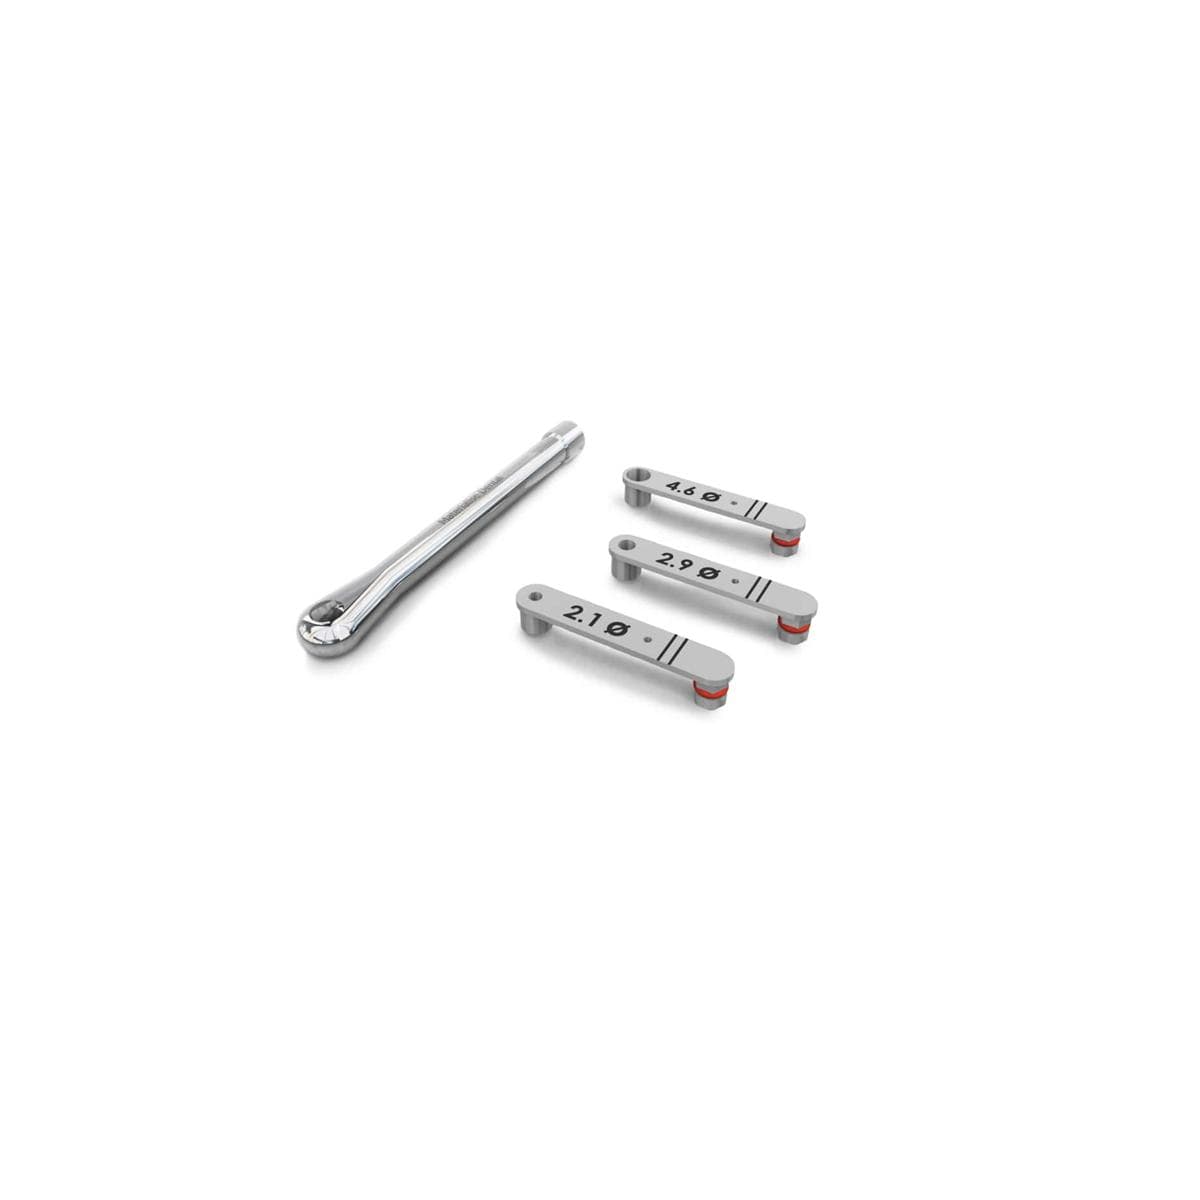 Cl de forage DENTSPLY SIRONA - Diamtre 3.5mm - Taille S